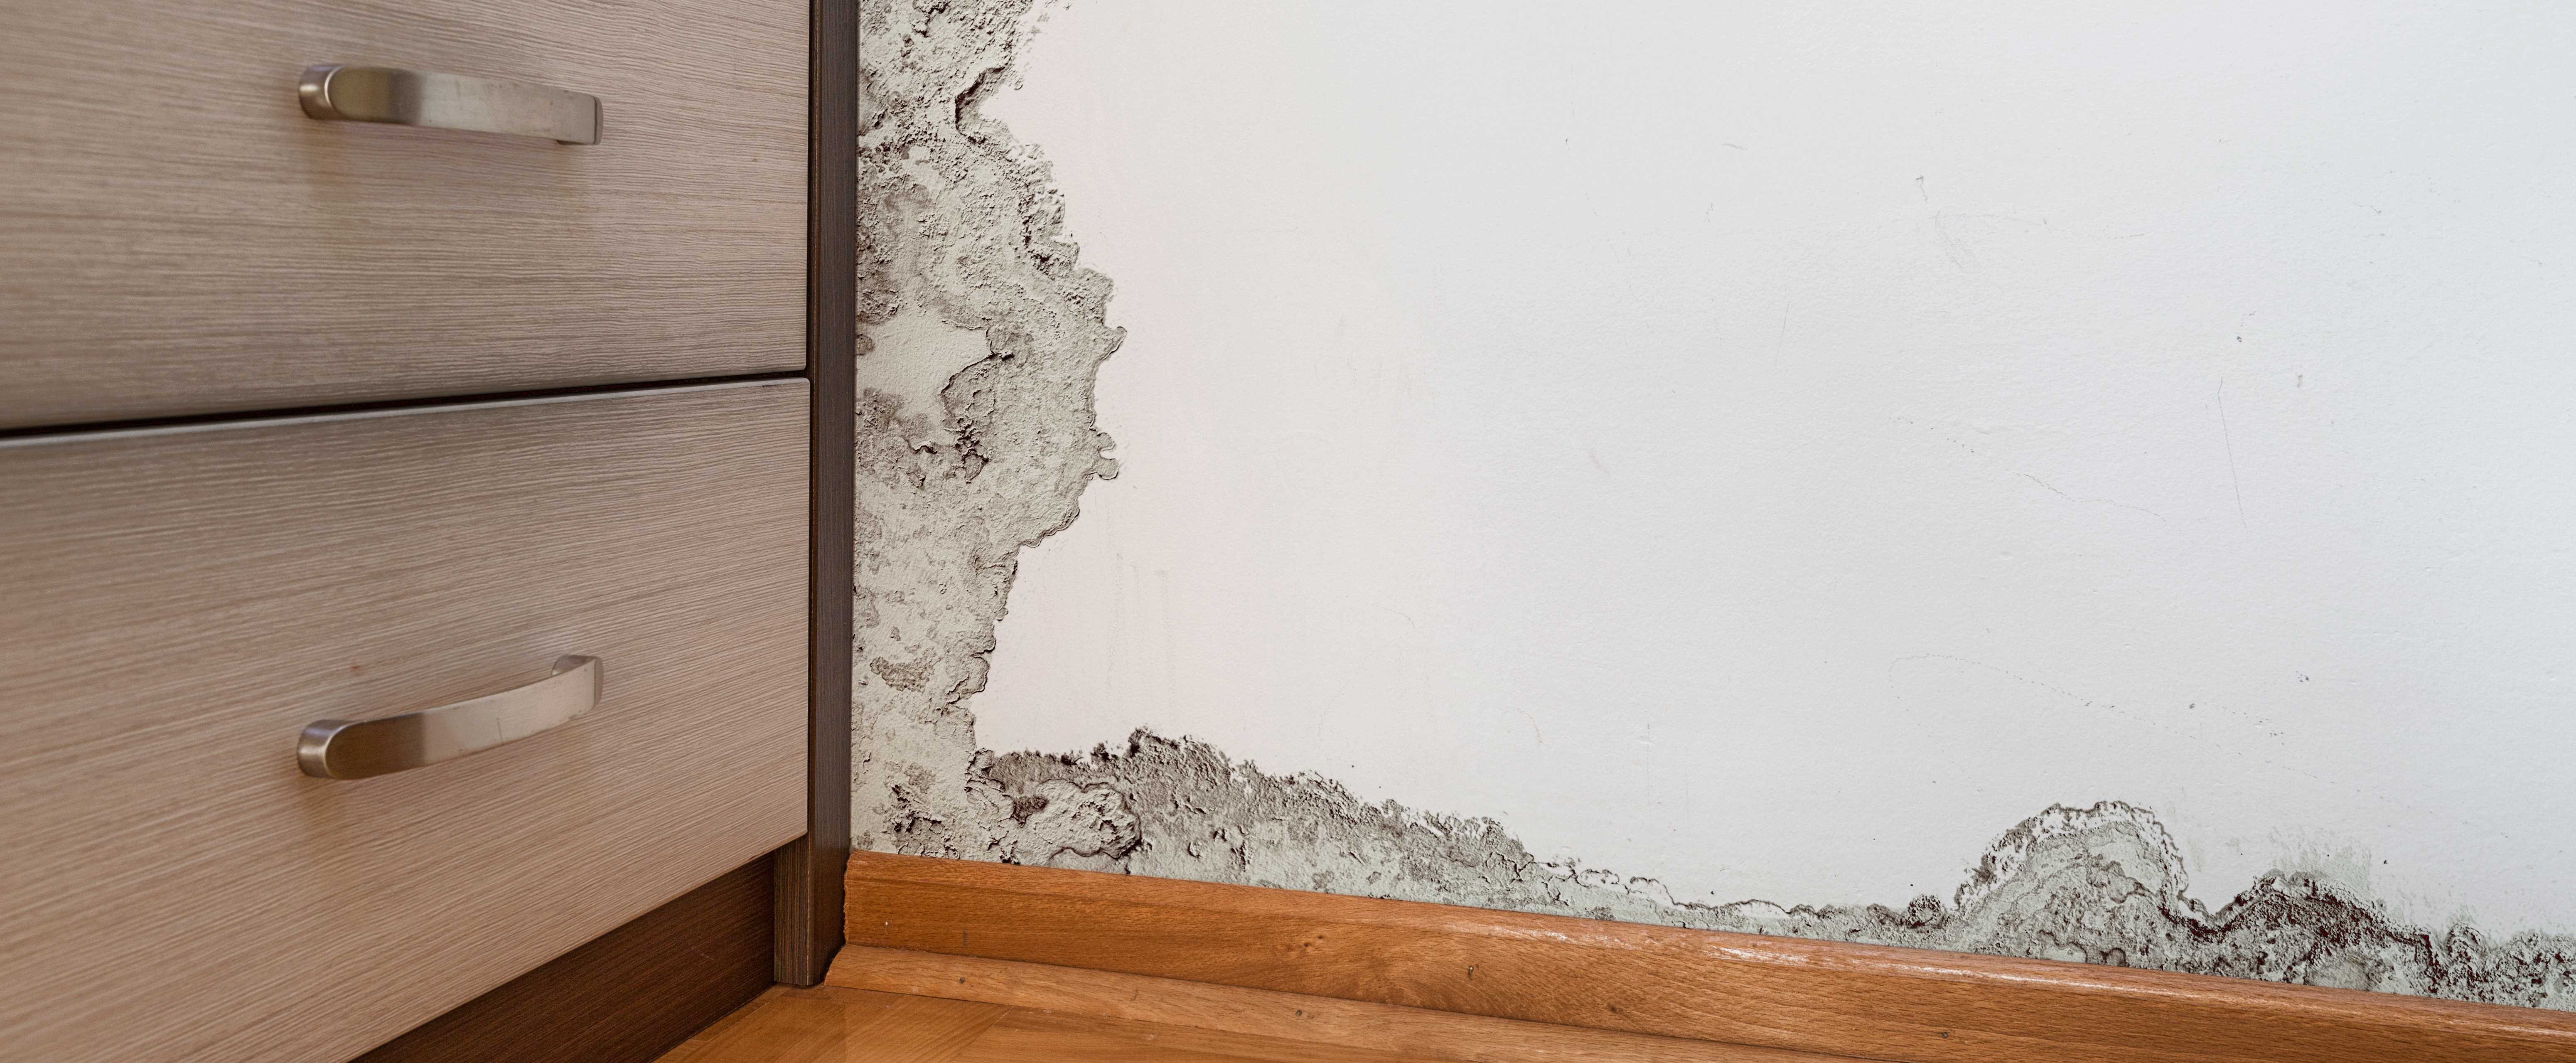 How Long Before Mold Grows in a Flooded Home? - Mold Removal Springfield MO